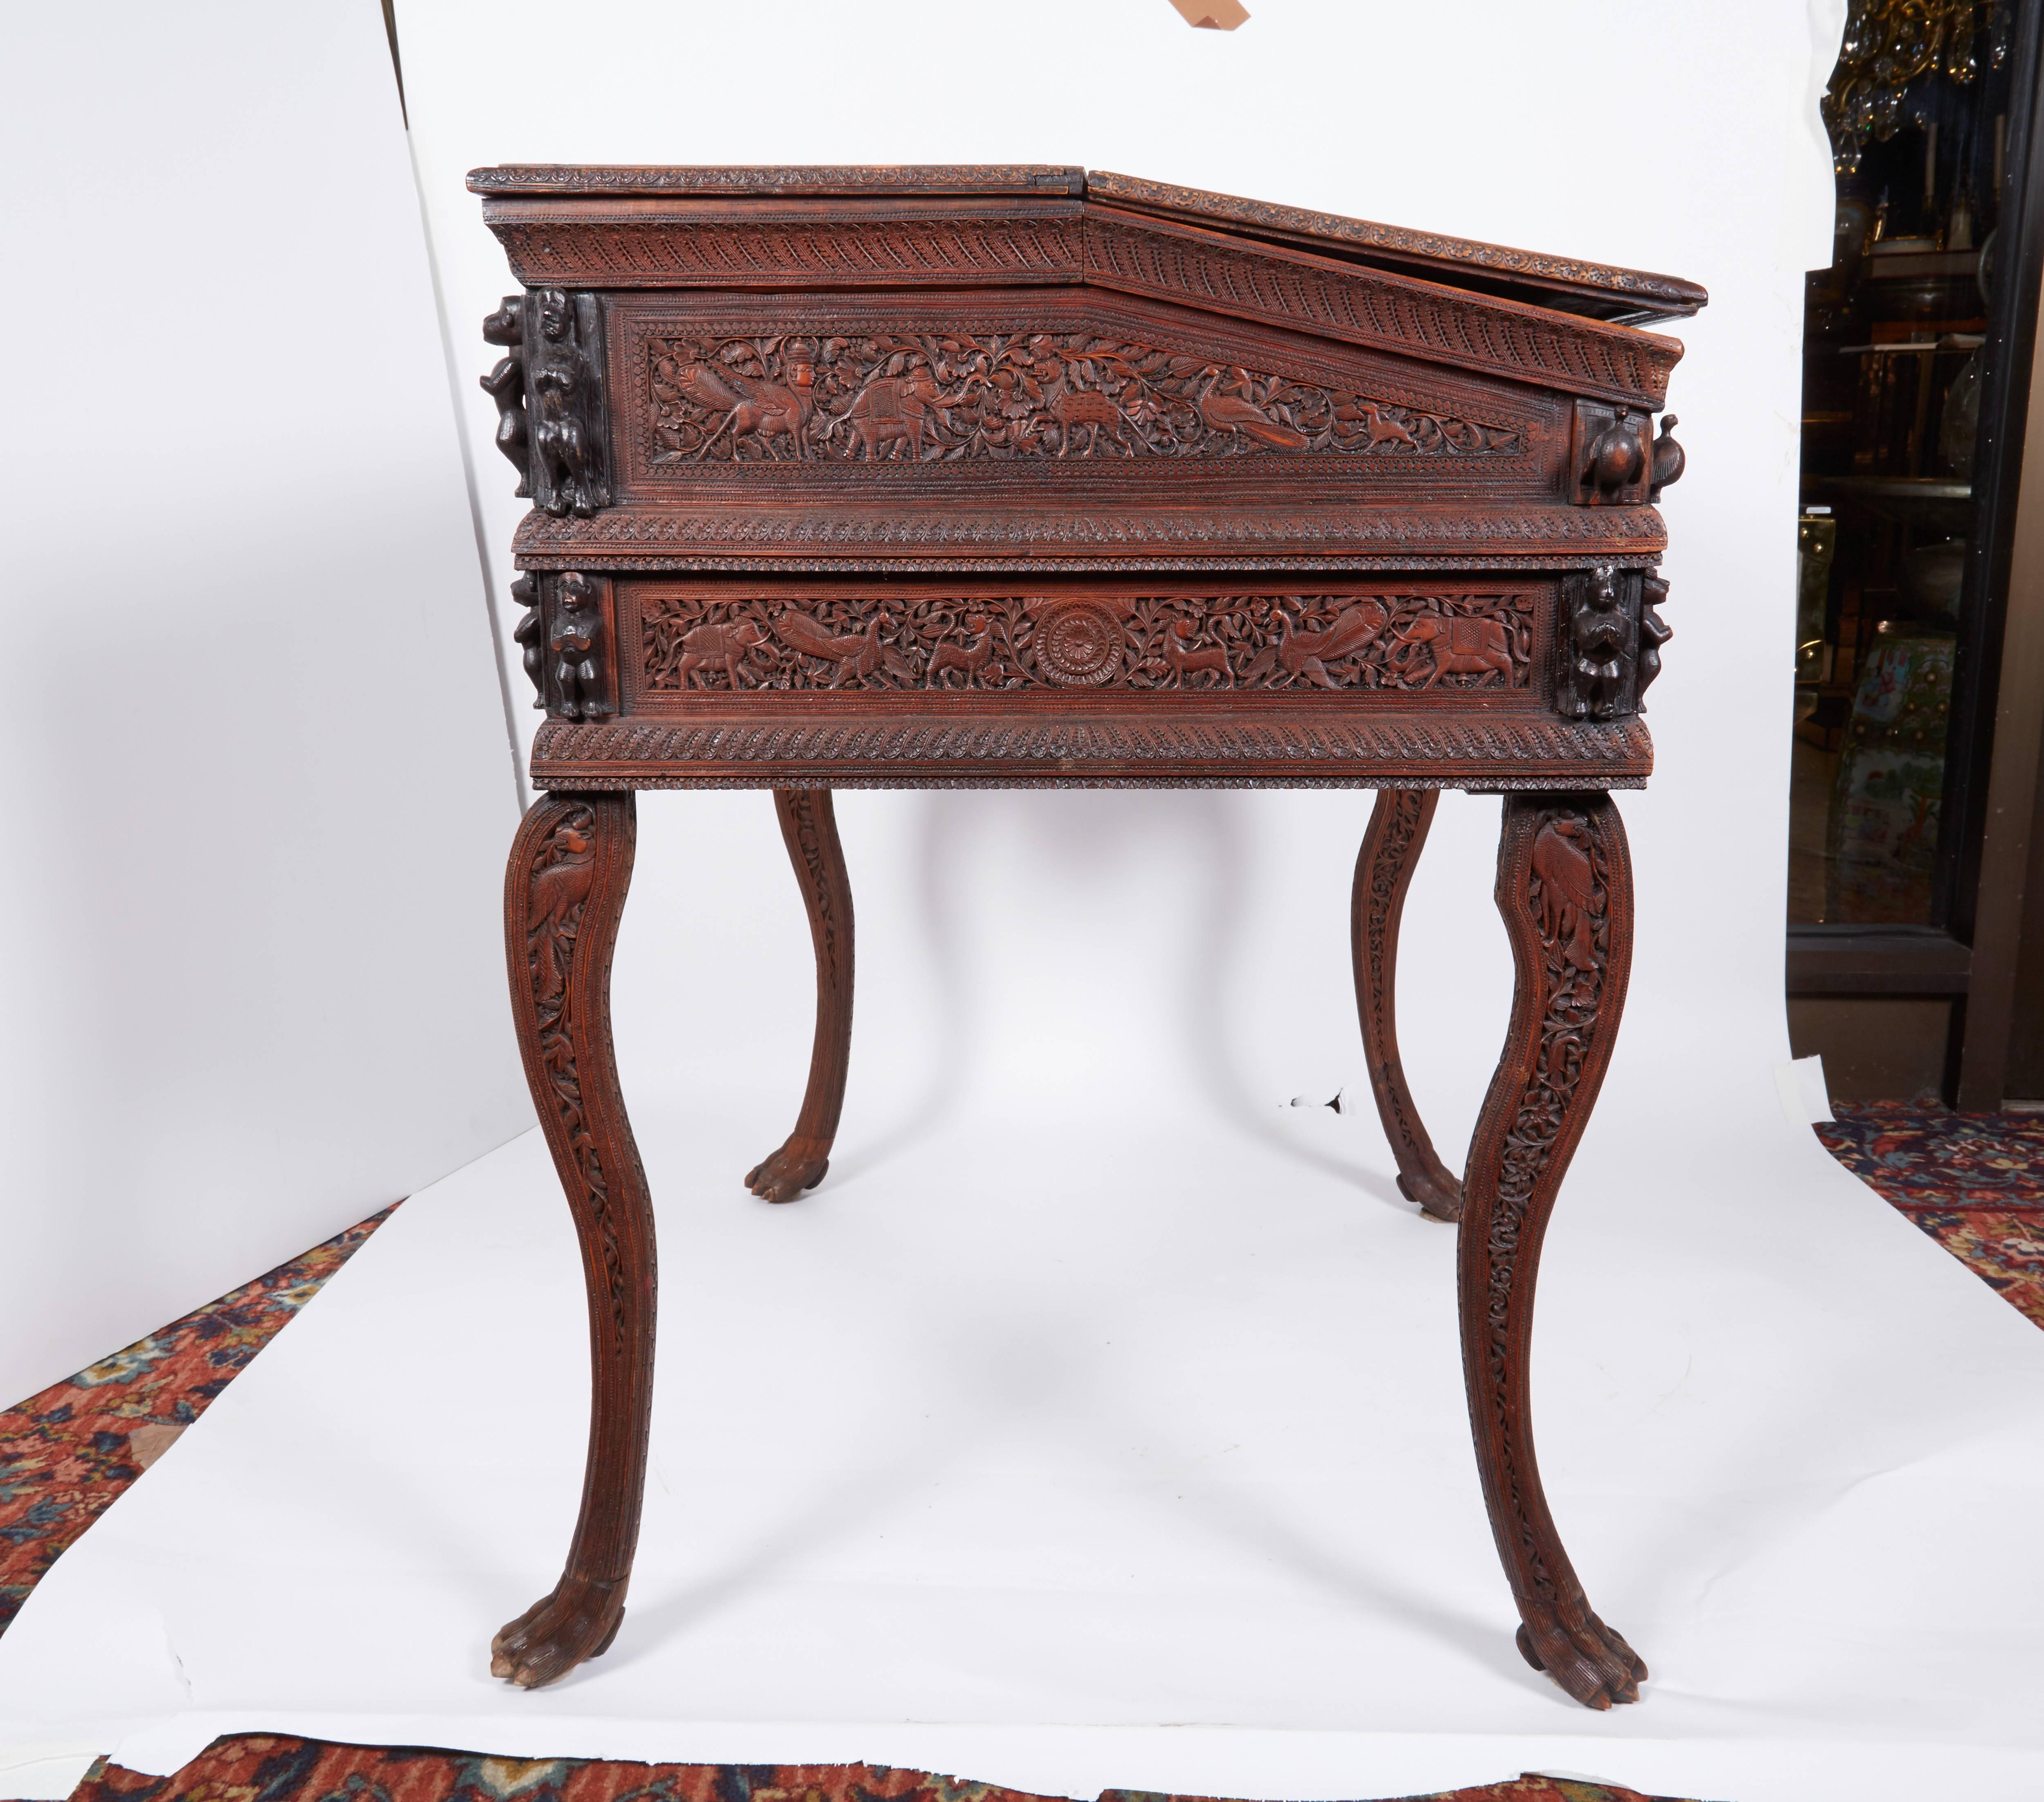 19th Century Exquisite Anglo-Indian Sandalwood Carved Writing Desk Mysore, South India